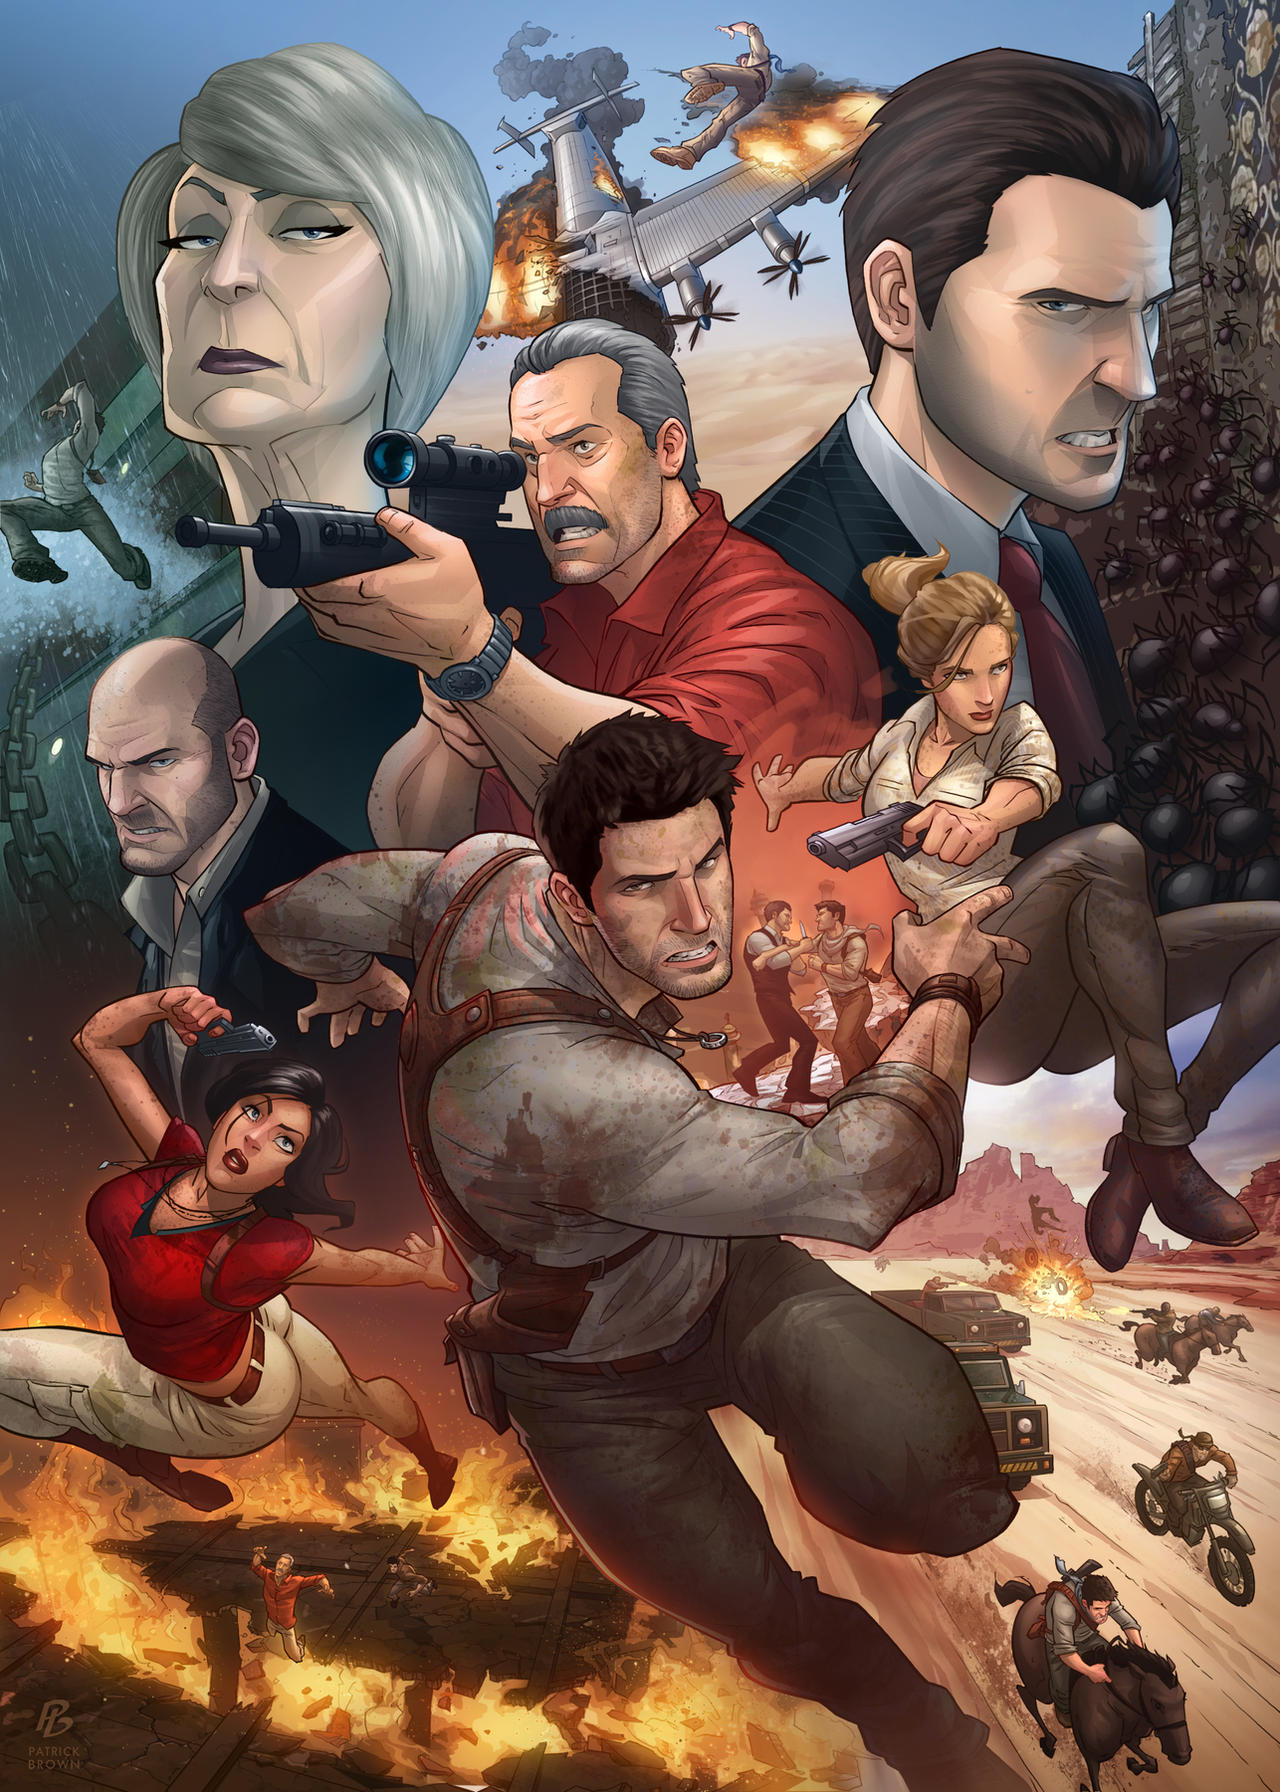 uncharted_3_by_patrickbrown-d5b9wrn.jpg